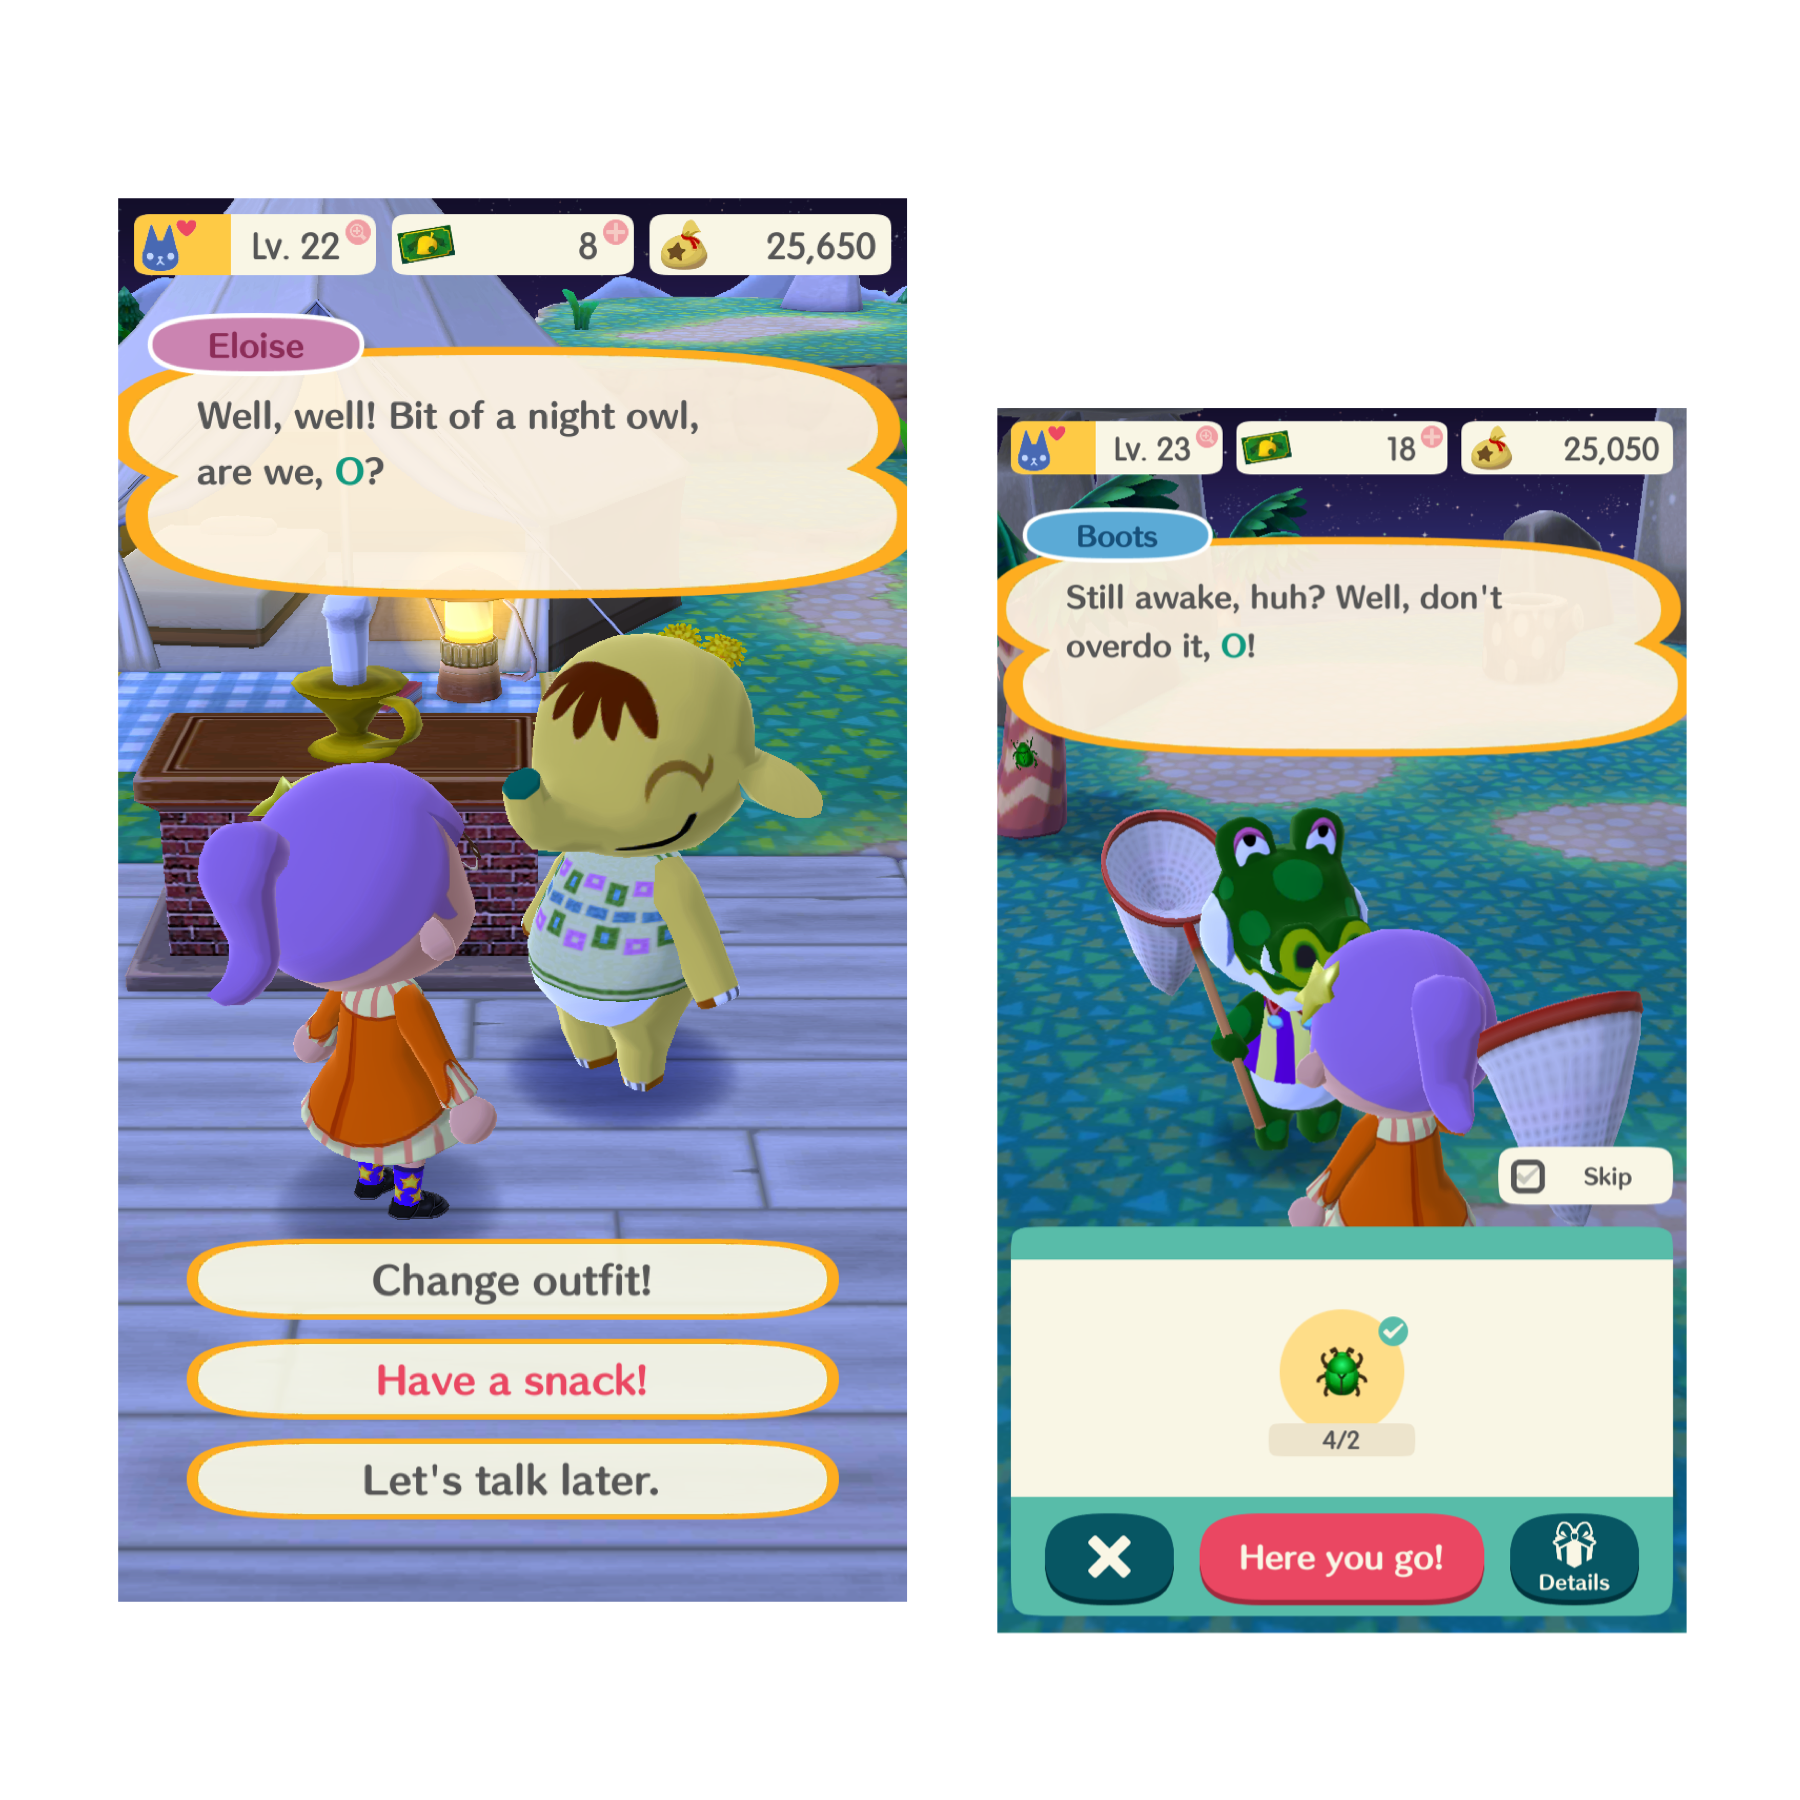 yes I am up at 3 am playing animal crossing 